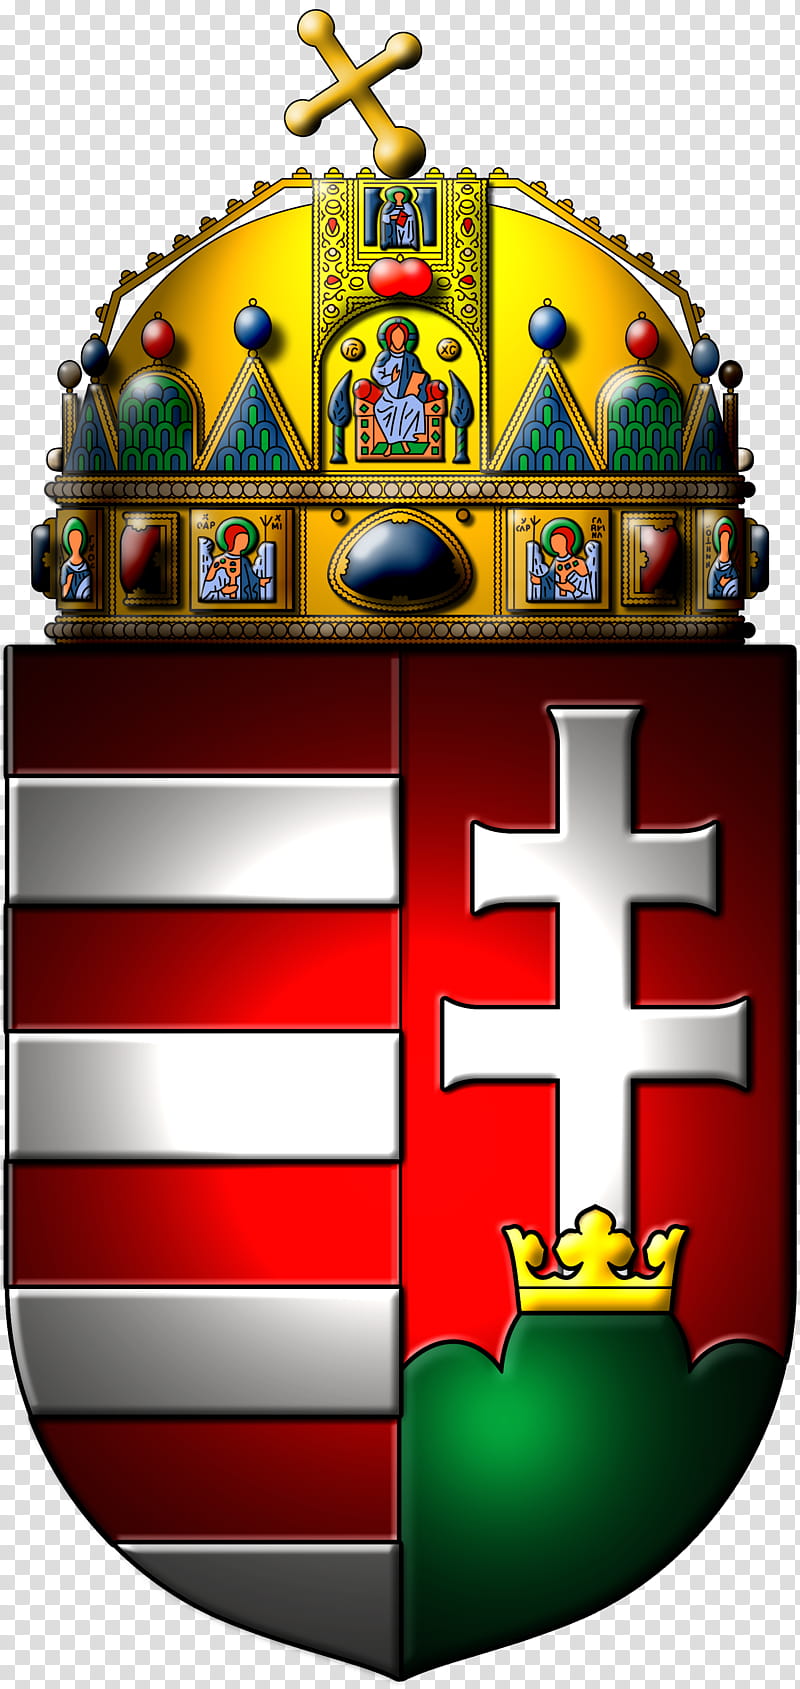 Flag, Hungary, Coat Of Arms Of Hungary, Flag Of Hungary, Kingdom Of Hungary, Austriahungary, Coat Of Arms Of Germany, Hungarian Peoples Republic transparent background PNG clipart